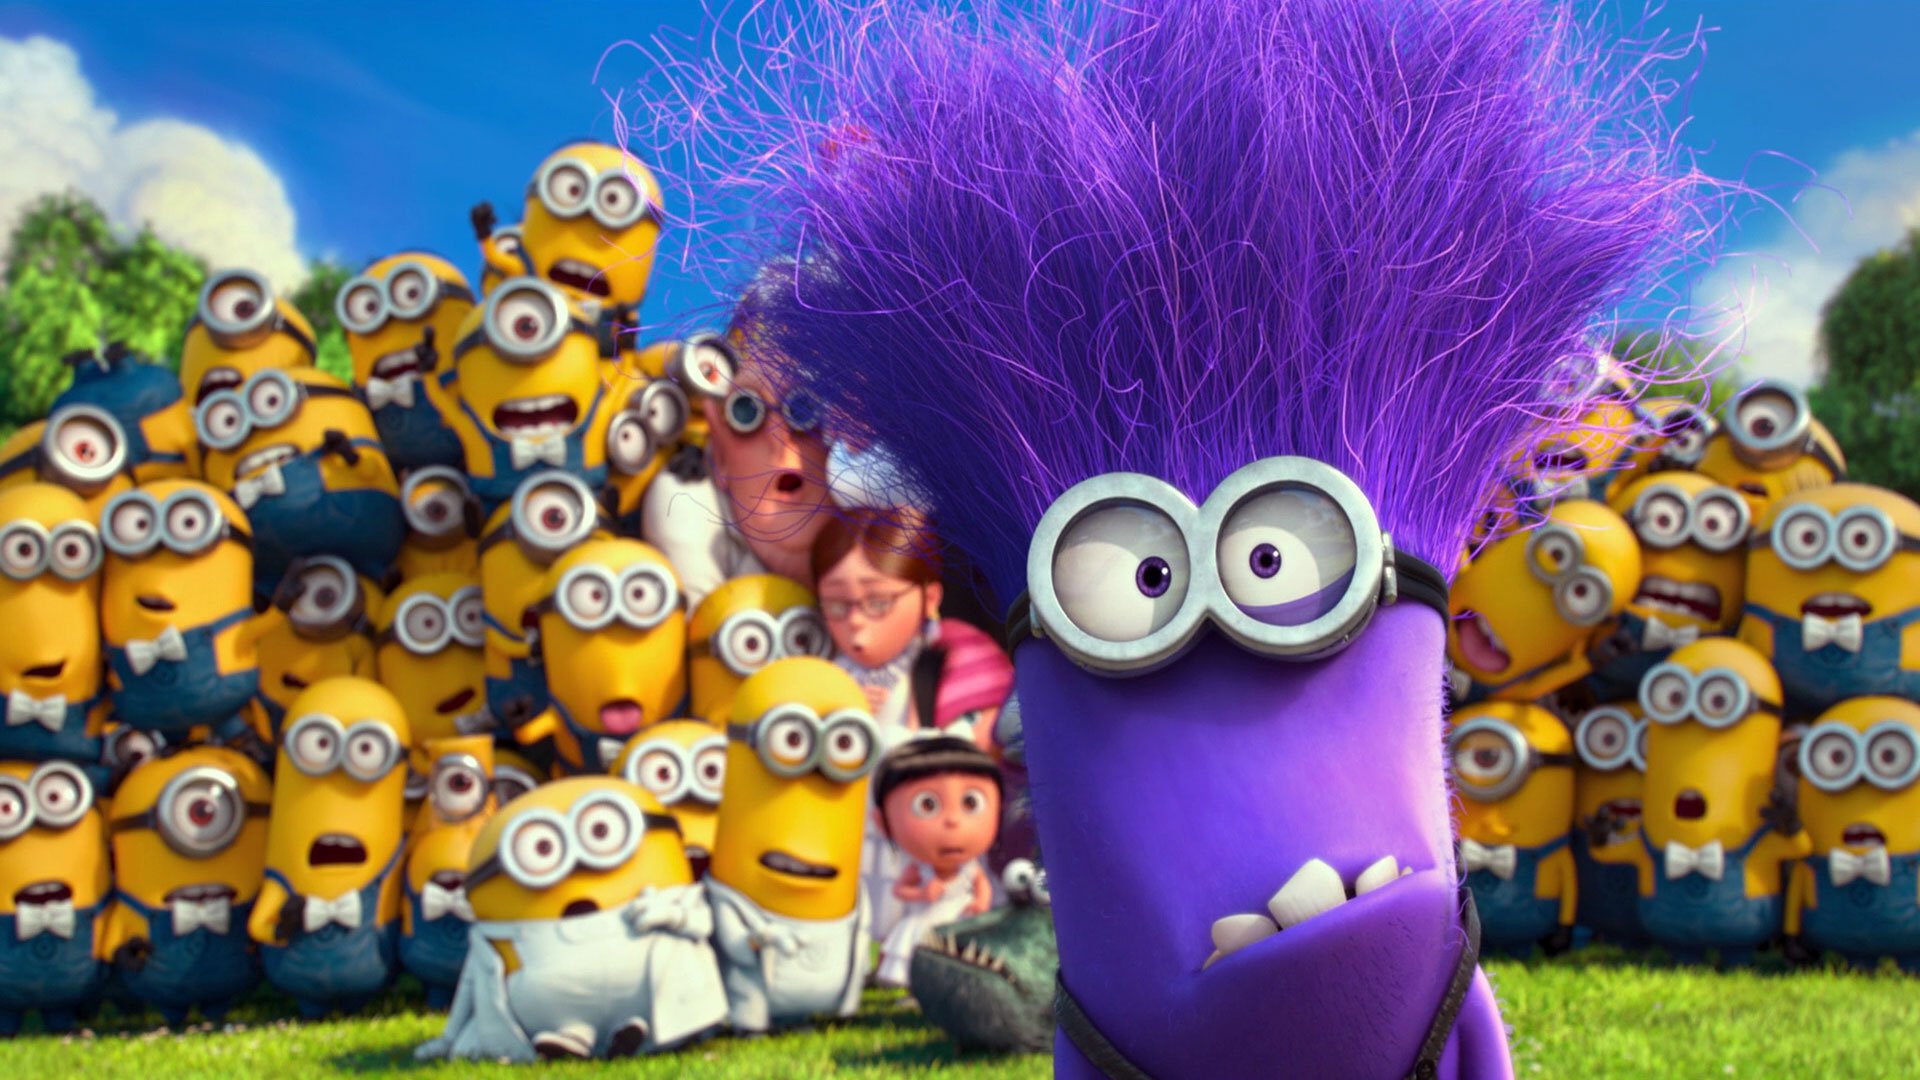 Wallpaper Despicable Me 3 minion best animation movies Movies 13178